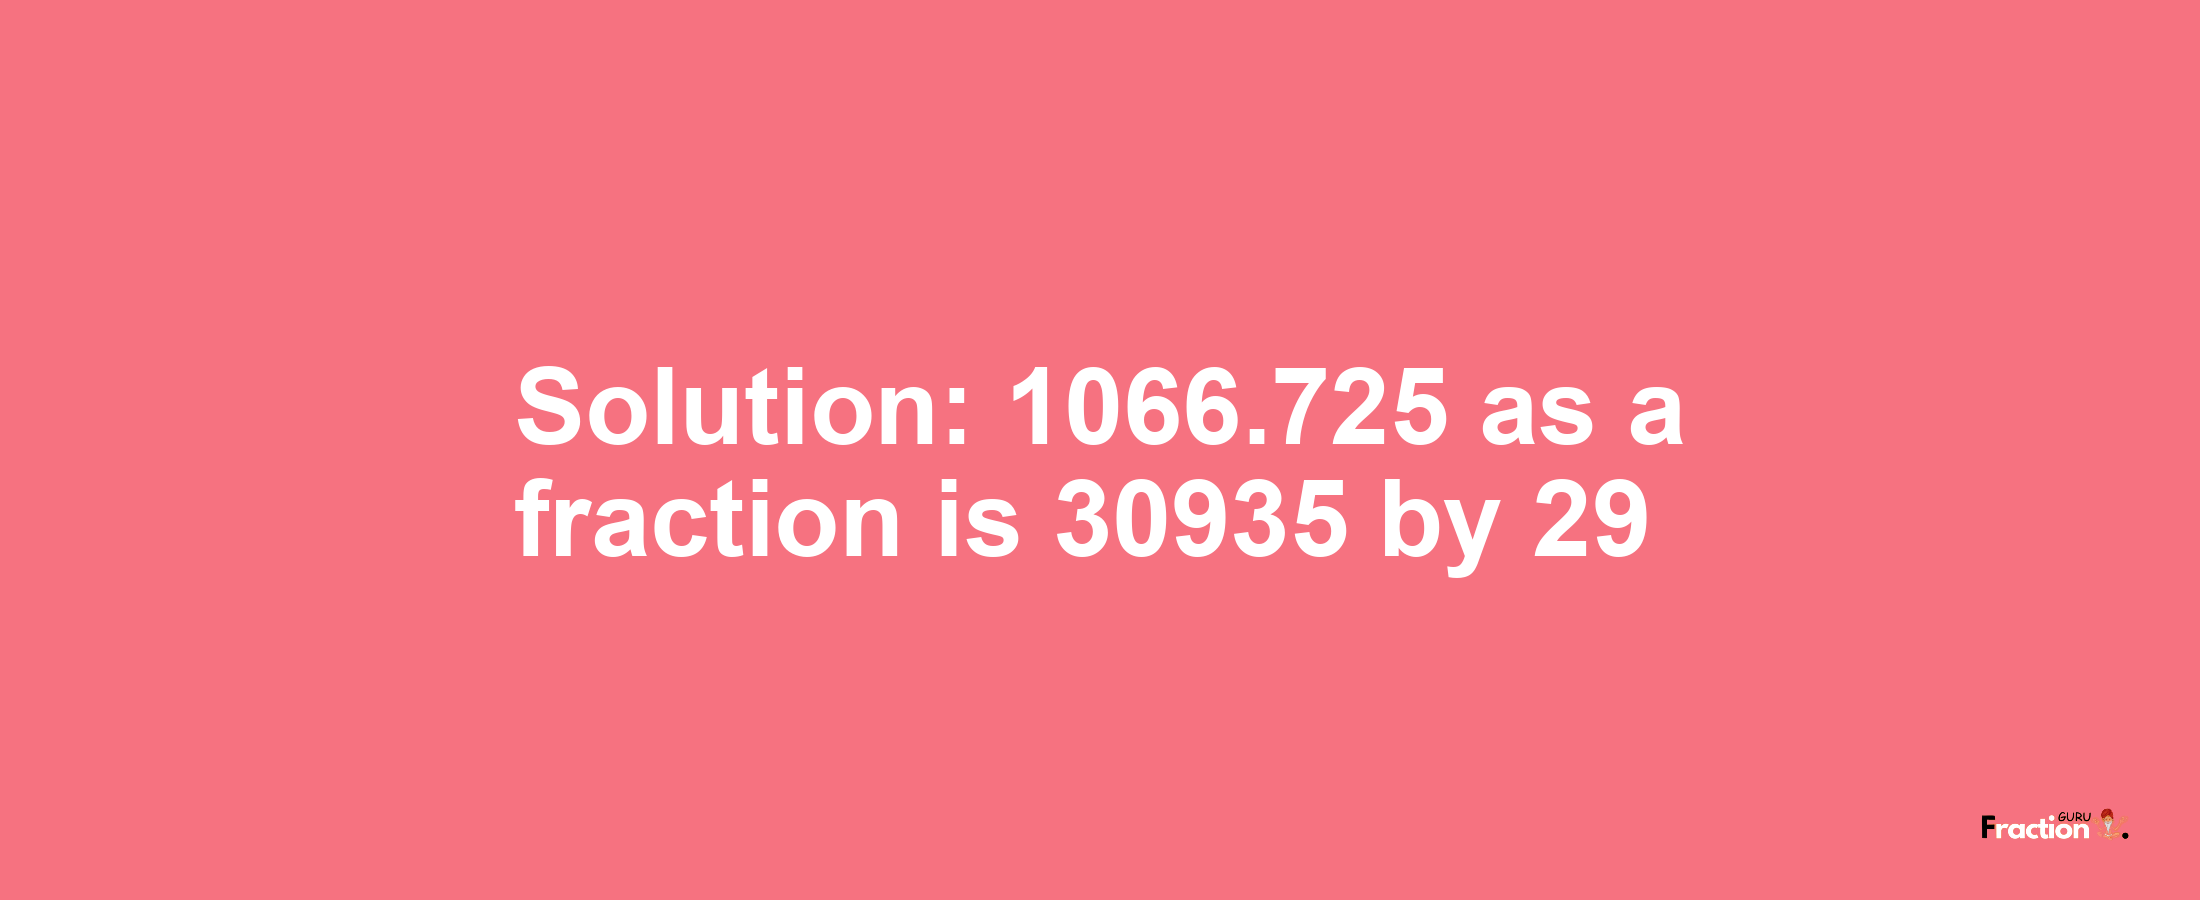 Solution:1066.725 as a fraction is 30935/29